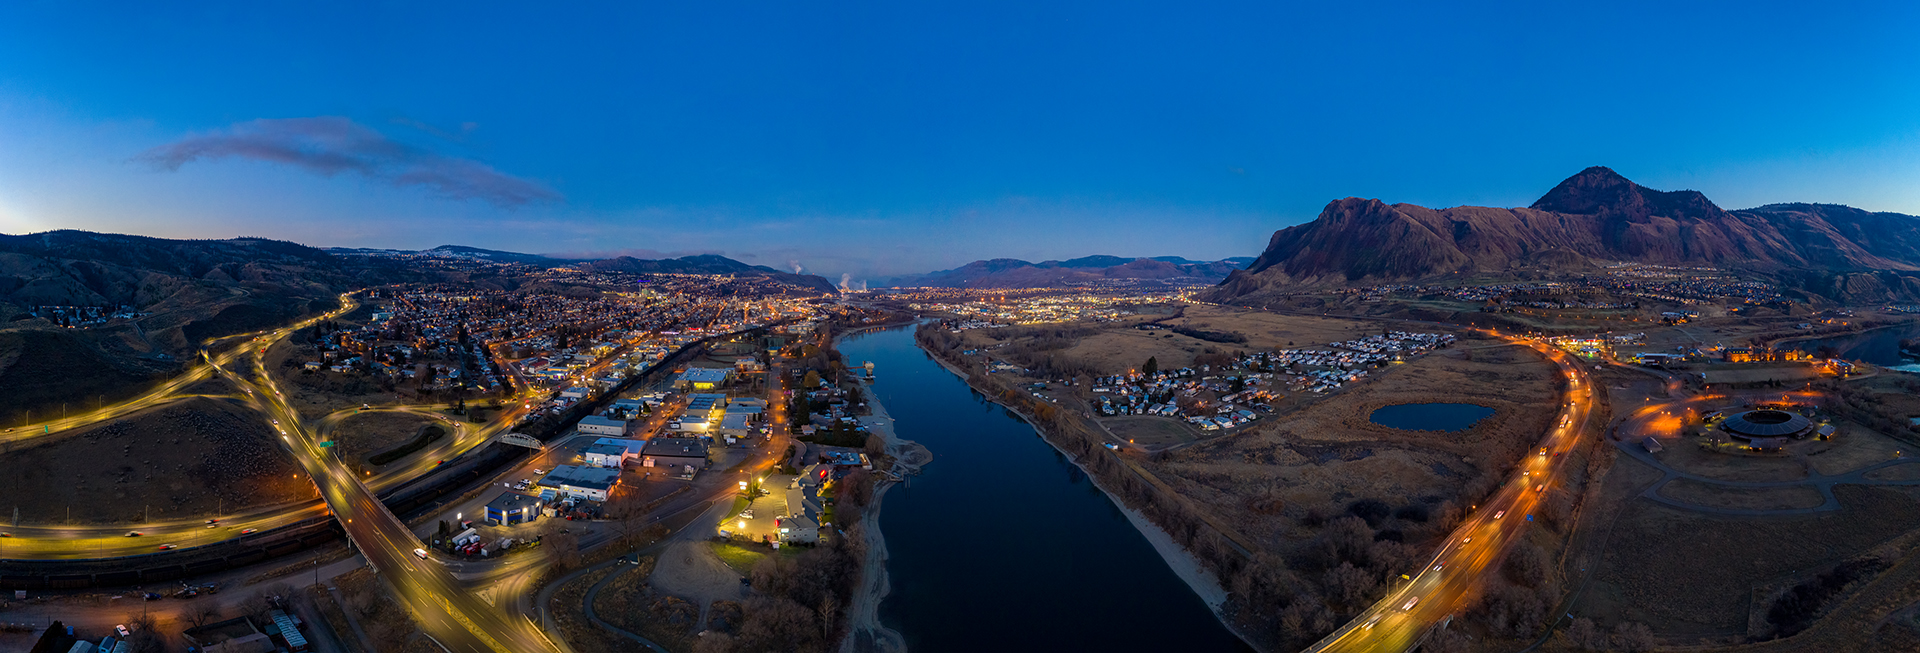 Beautiful Kamloops city with lights and moving vehicles